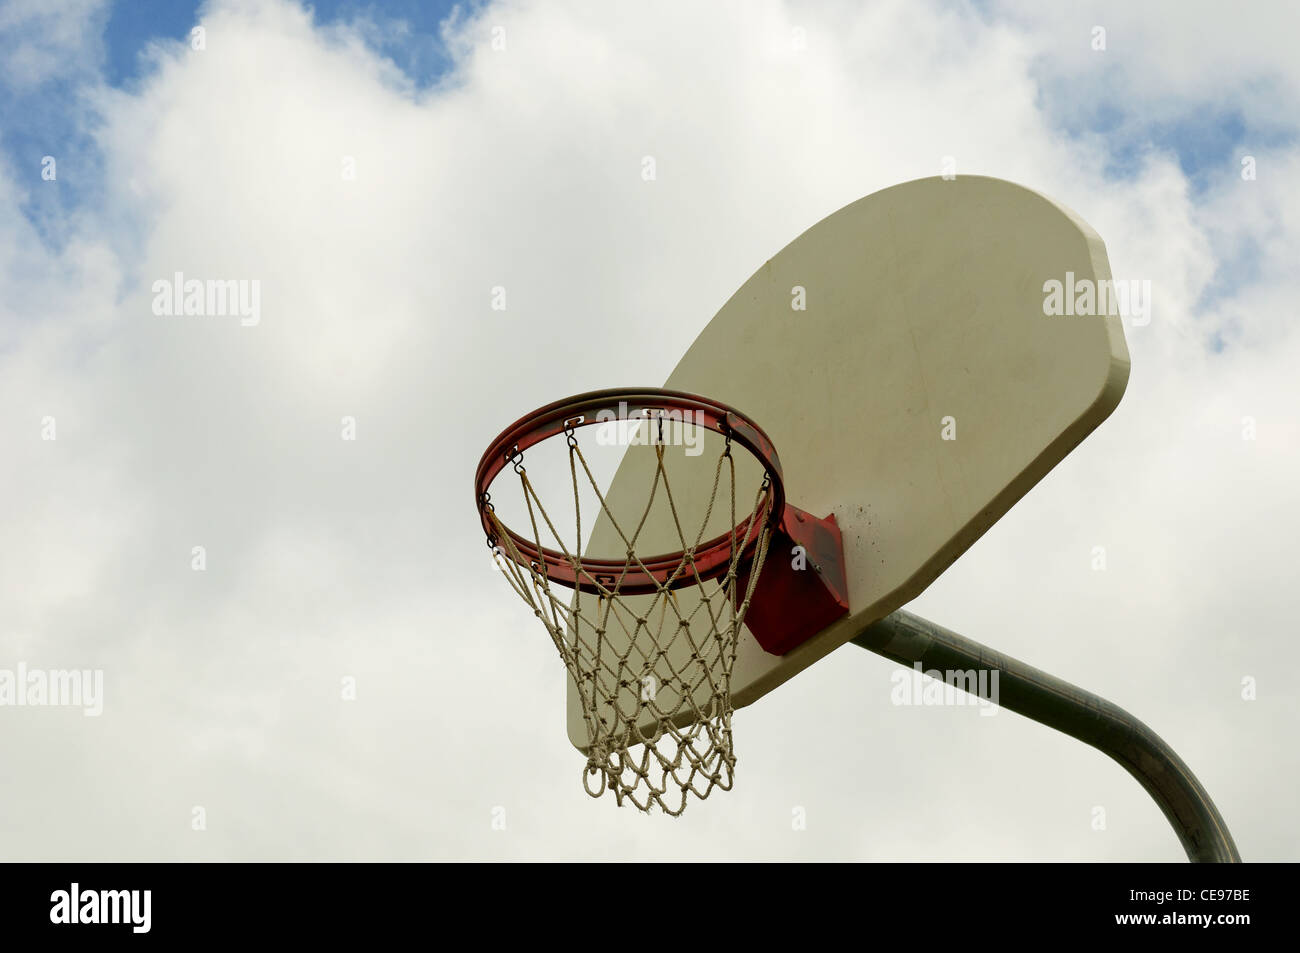 A Basket Ball Hoop on a Cloudy Background Stock Photo